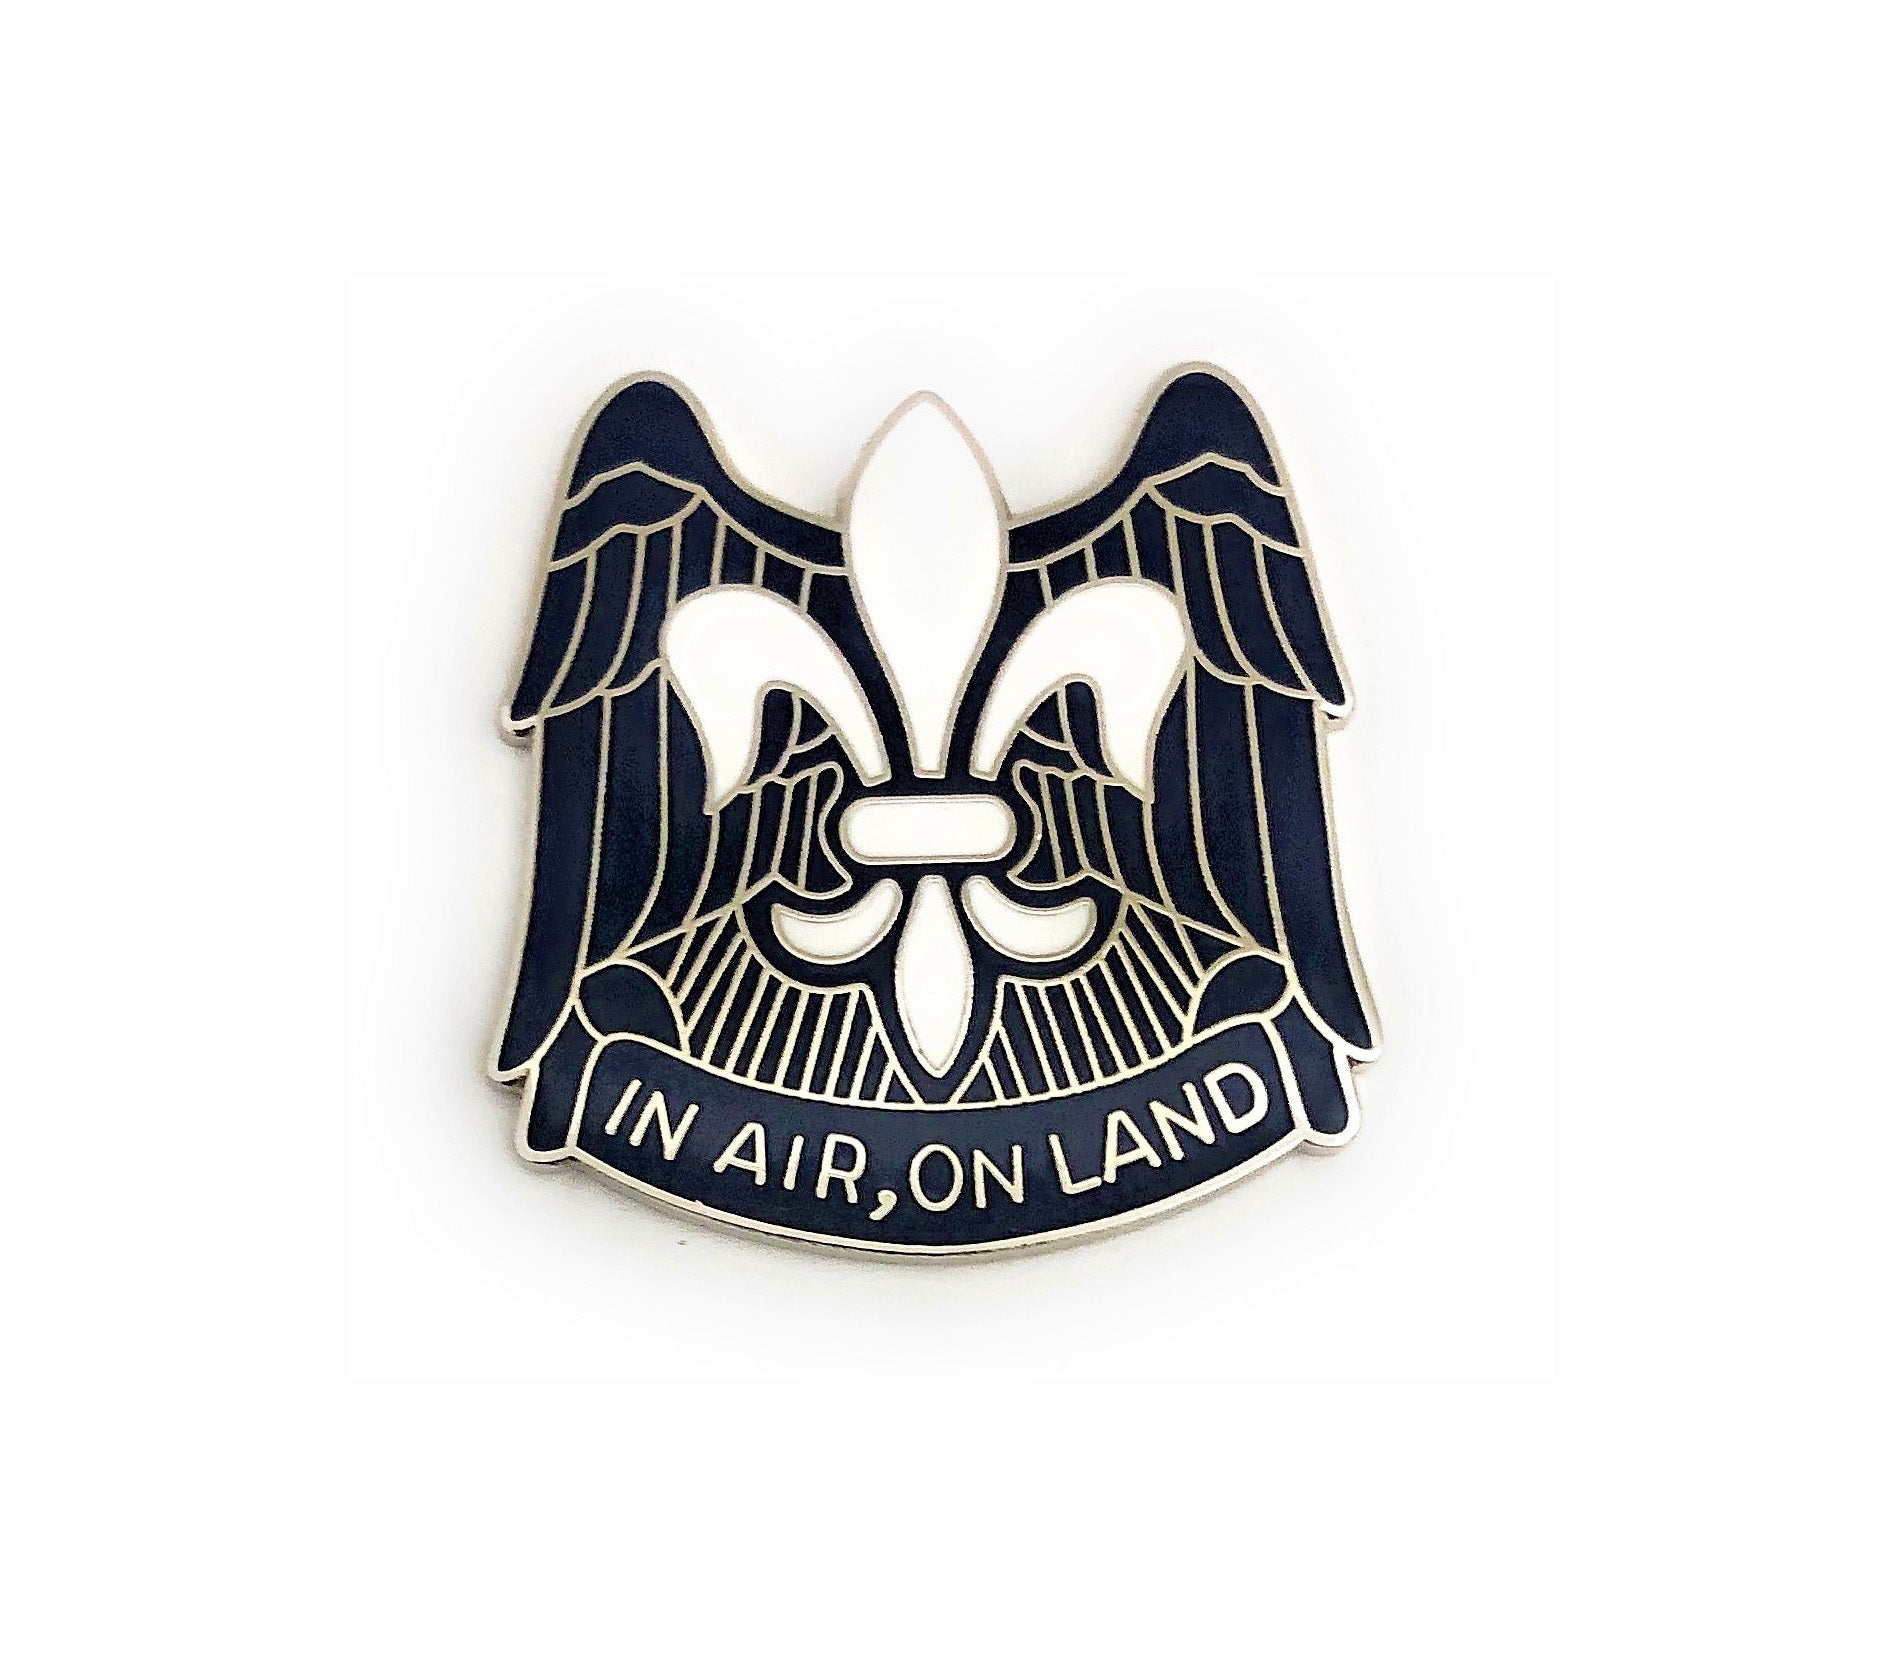 82nd Airborne Division Crest (NCBU) "In Air, On Land" (each).